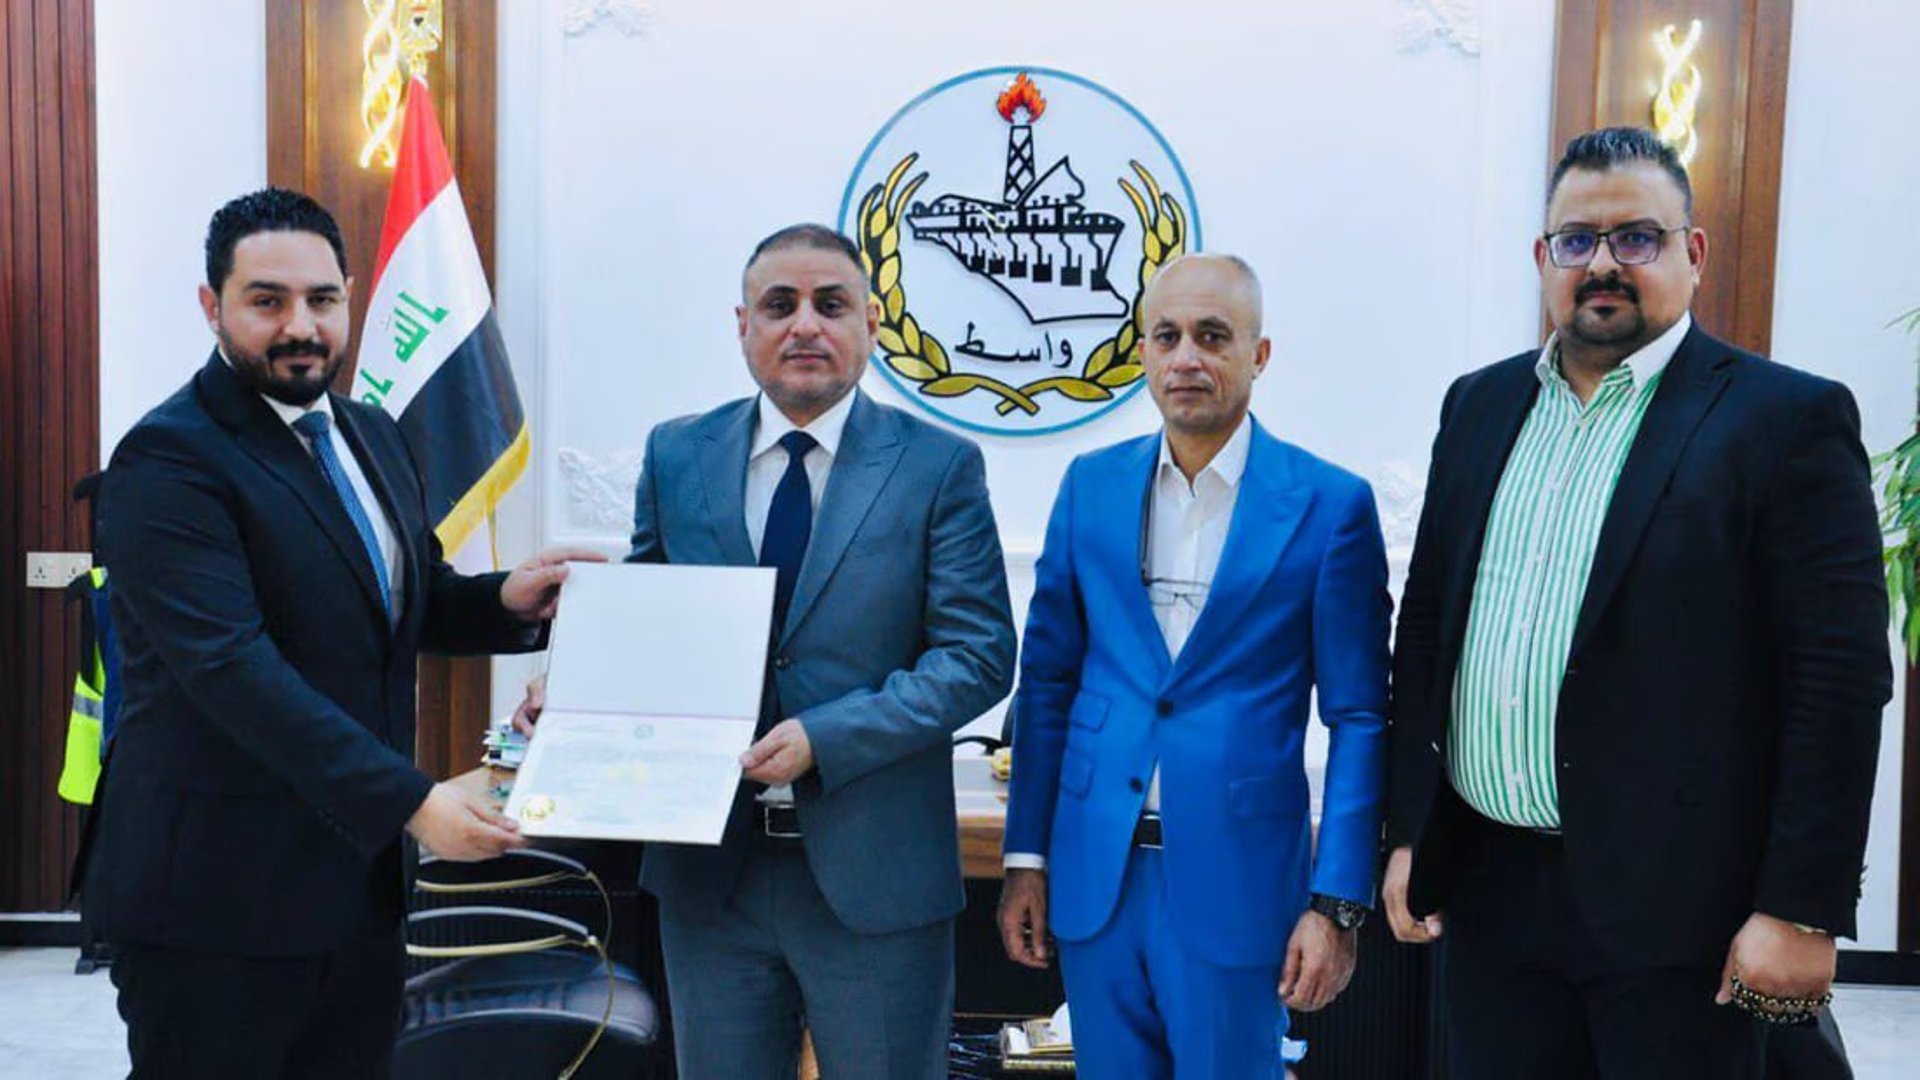 Wasit governorate grants license for ecofriendly brick factory